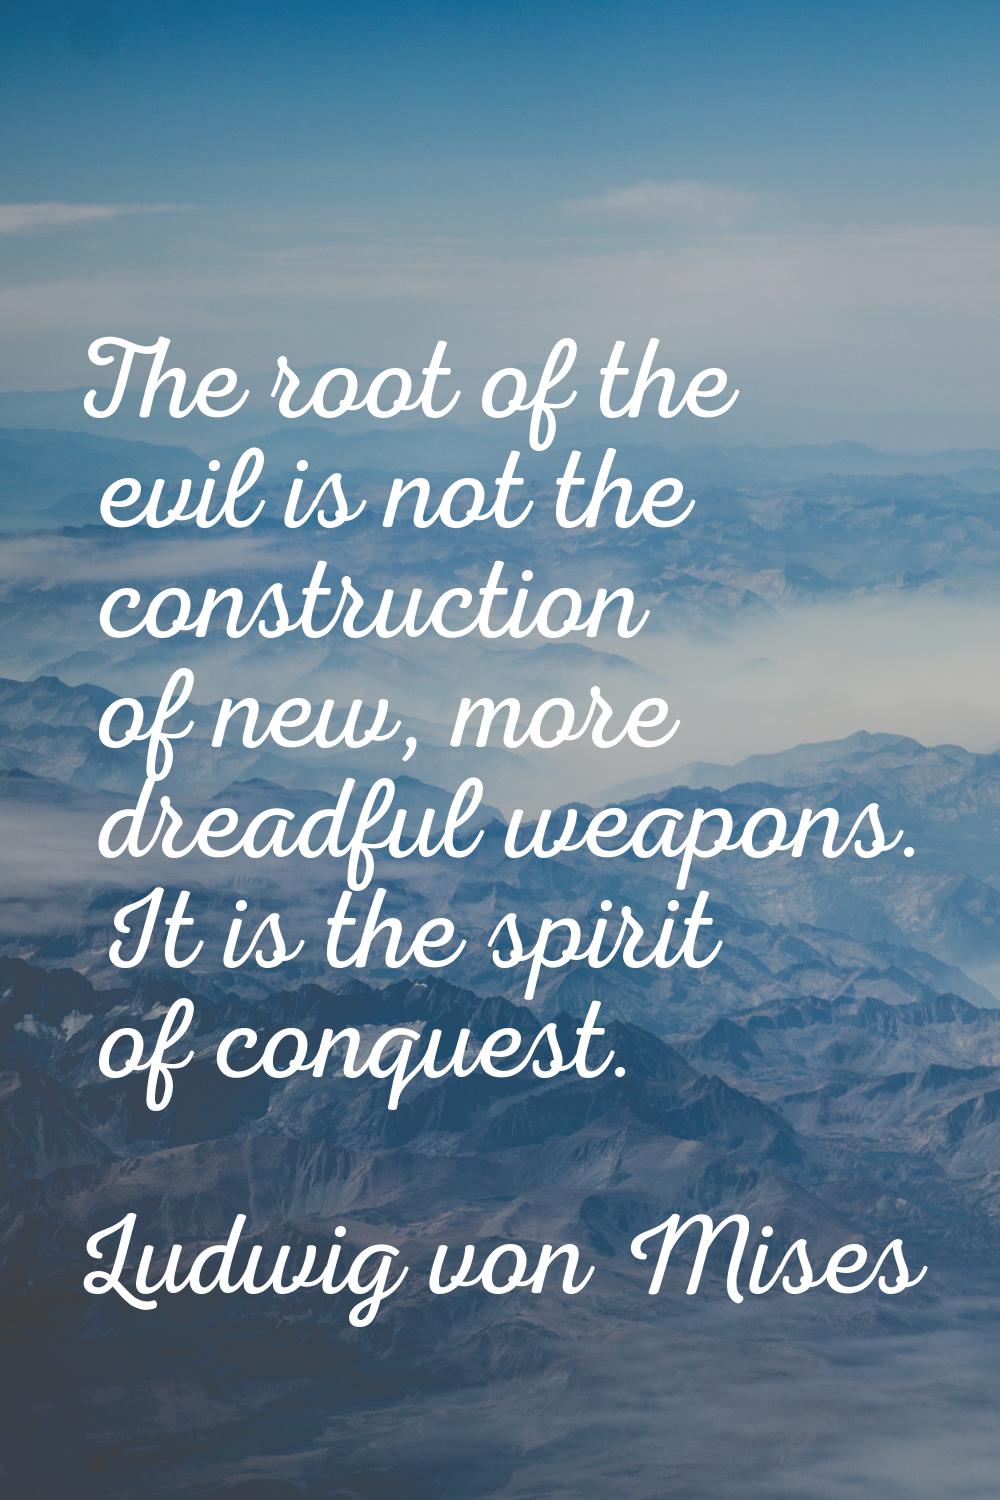 The root of the evil is not the construction of new, more dreadful weapons. It is the spirit of con